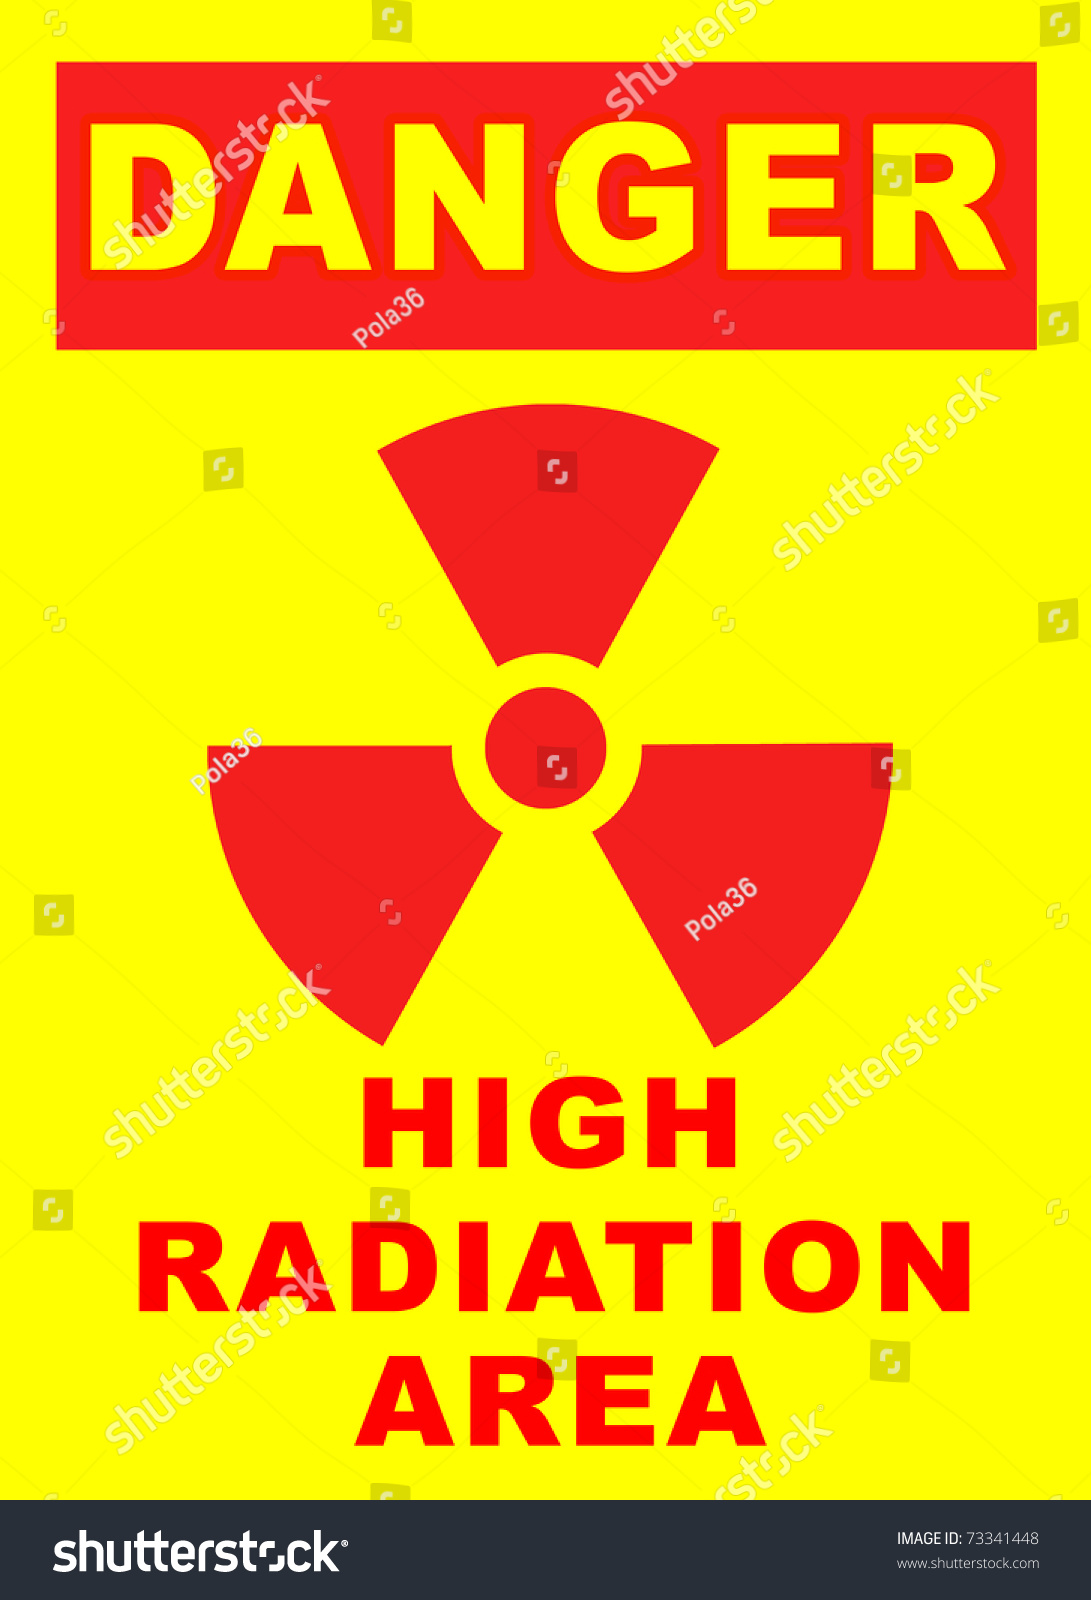 Safety Sign For High Radiation Area On A Yellow Background Stock Photo ...